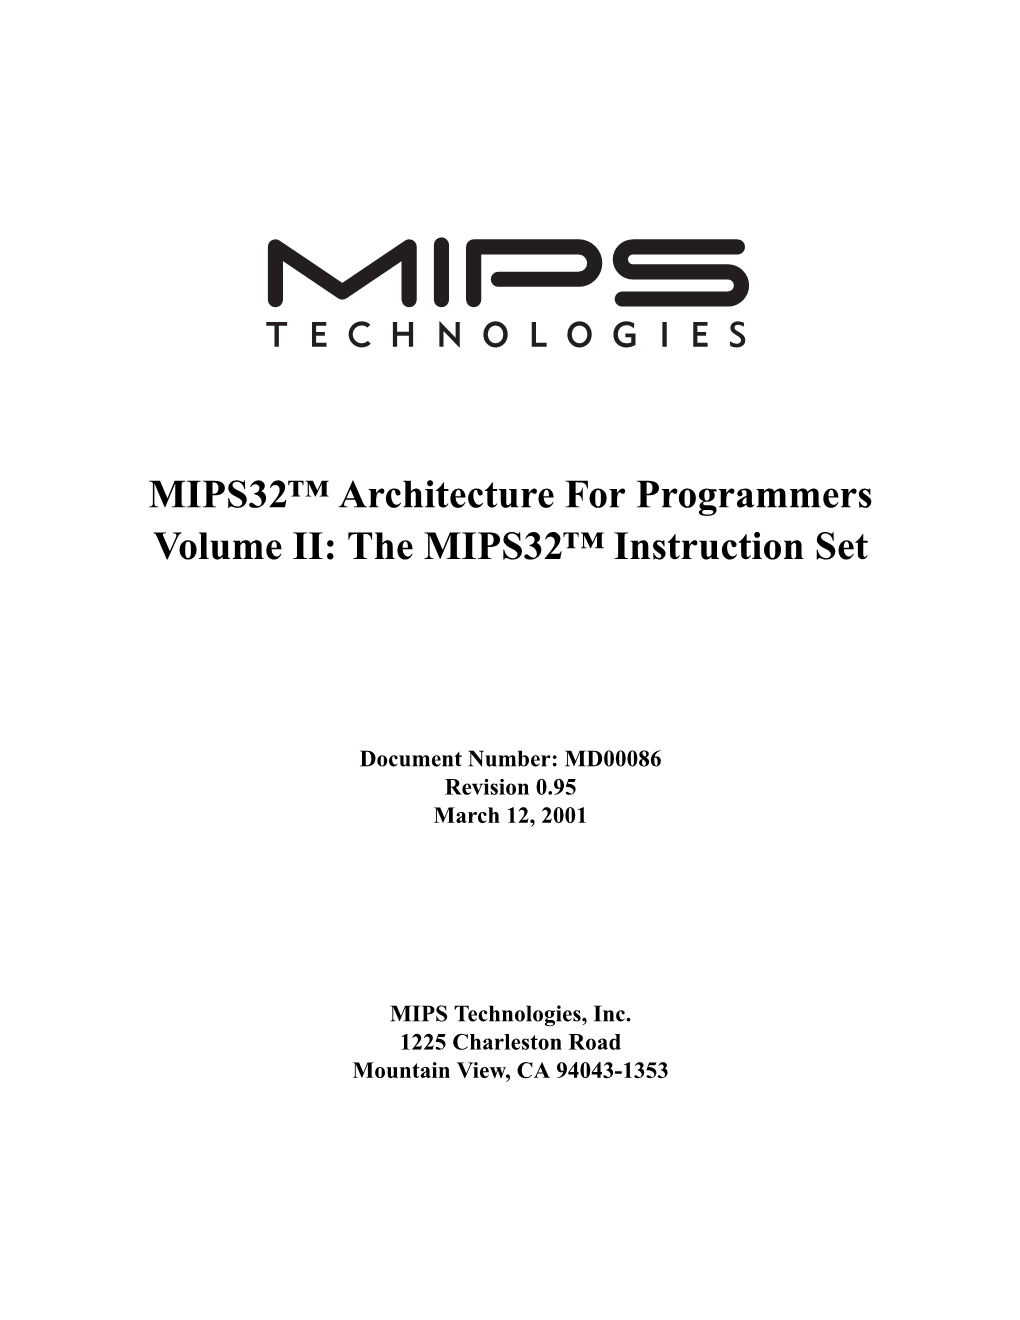 The MIPS32™ Instruction Set